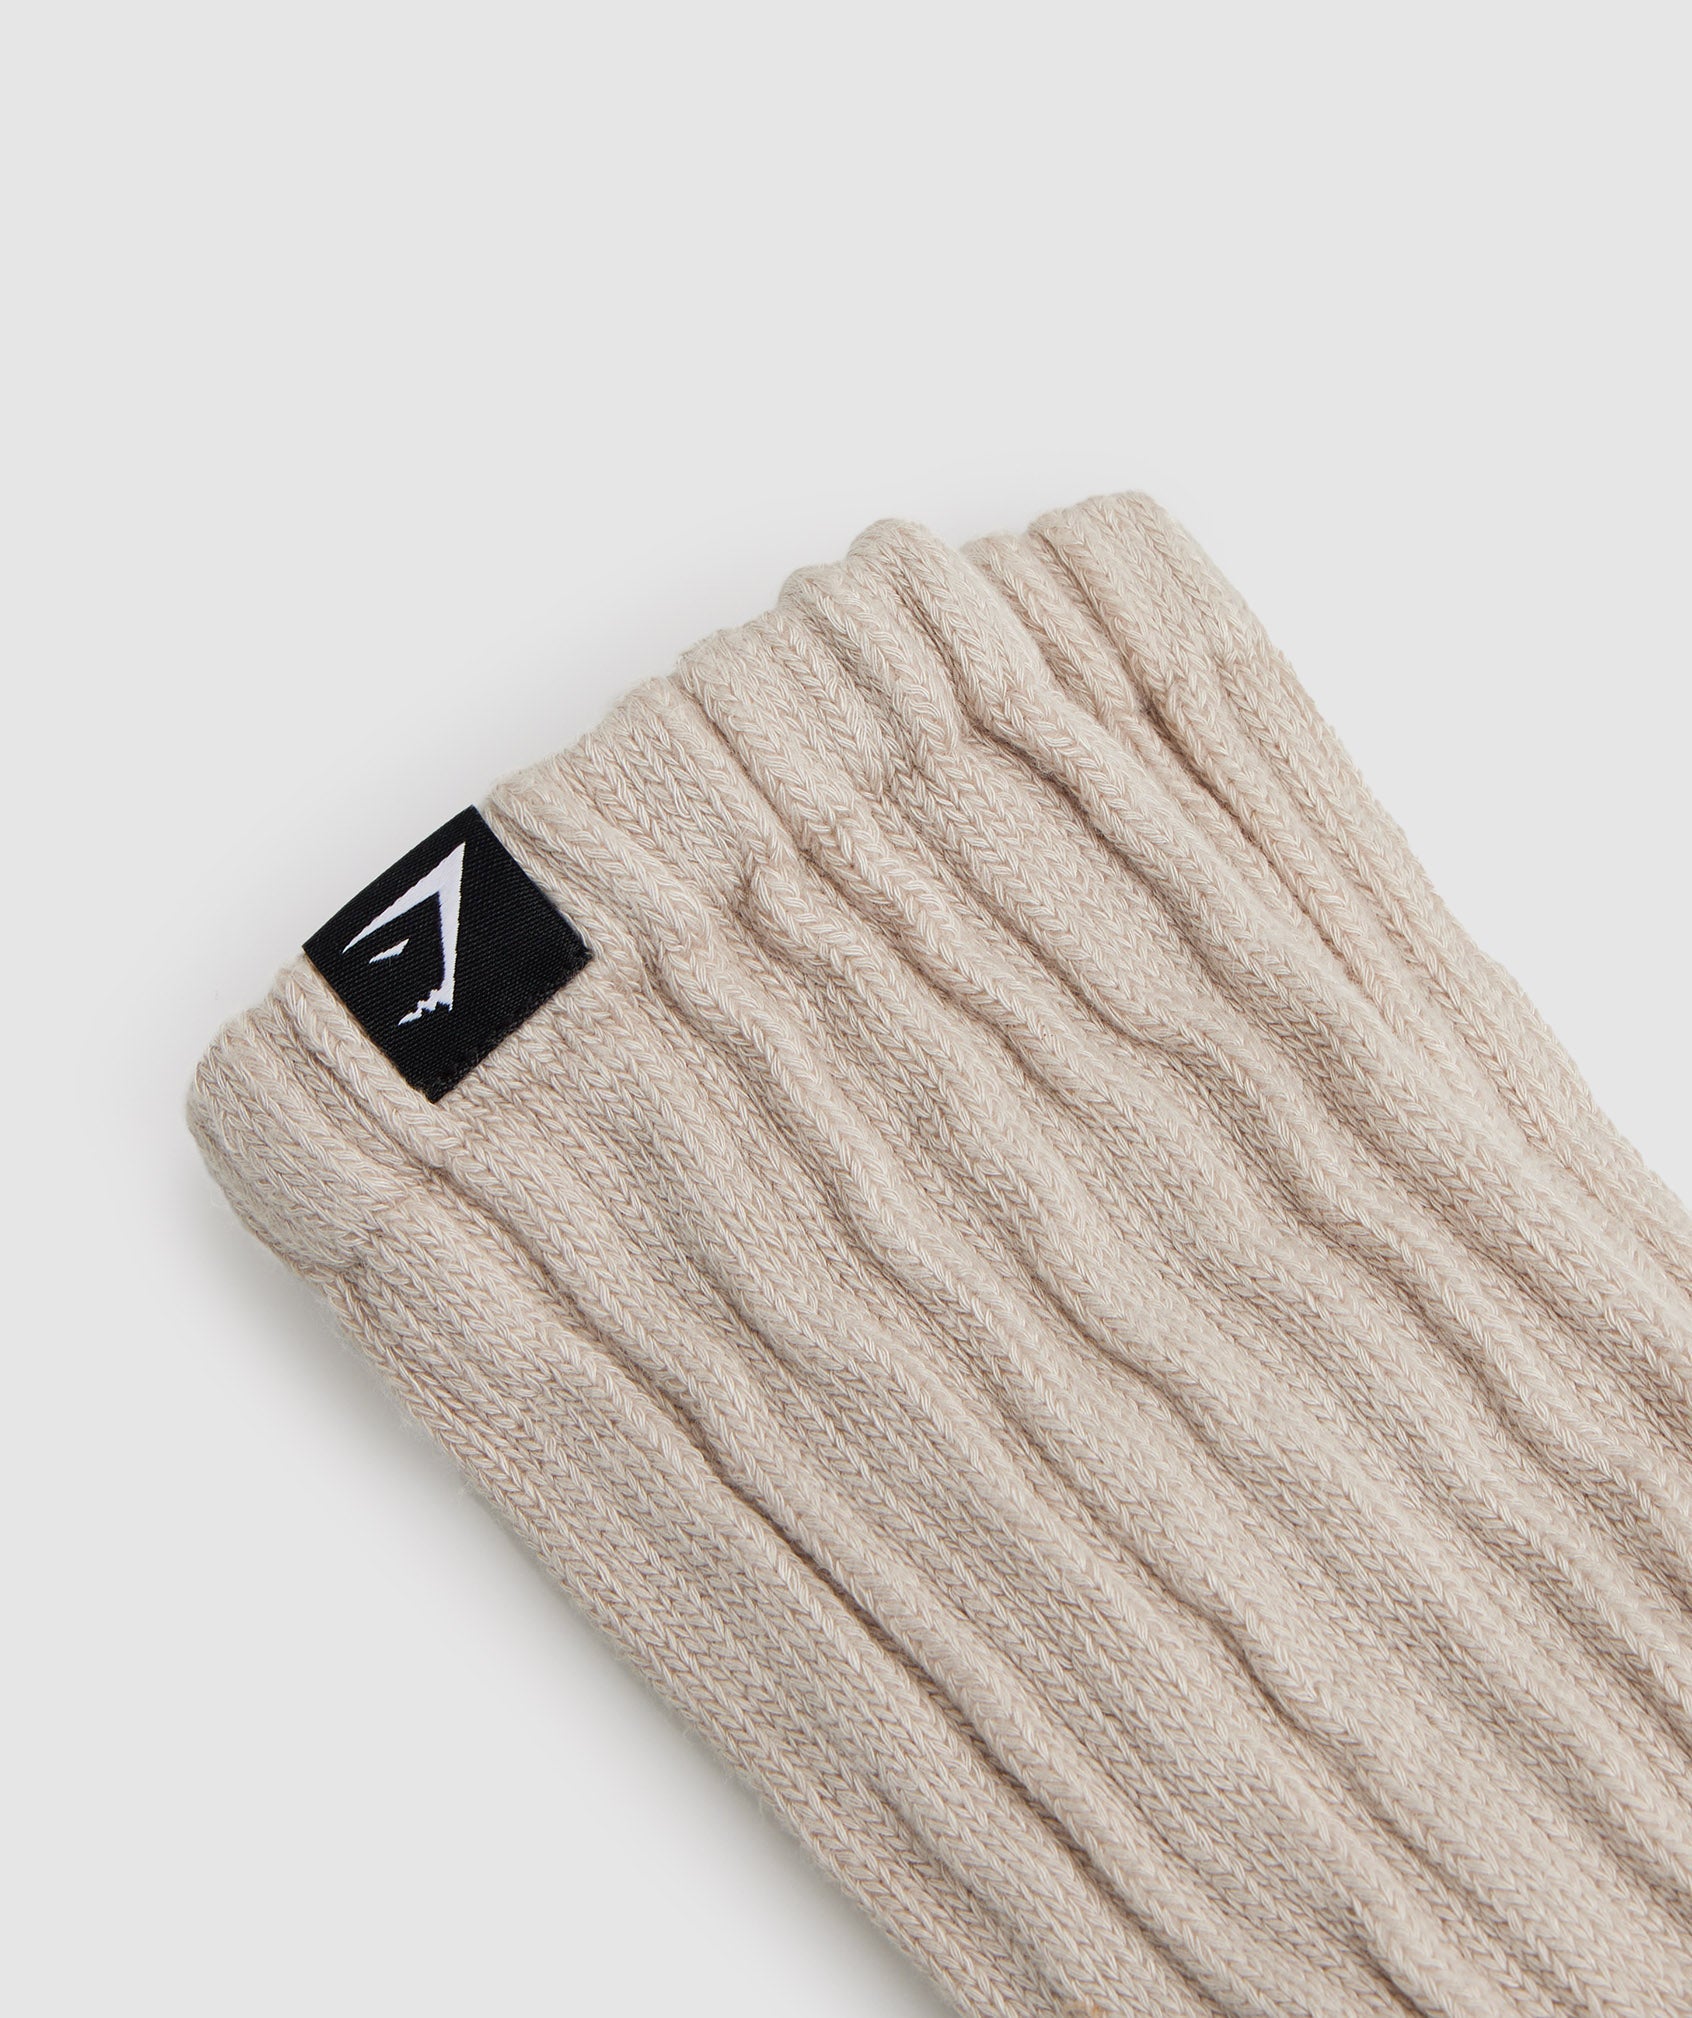 Comfy Rest Day Socks in Pebble Grey - view 2